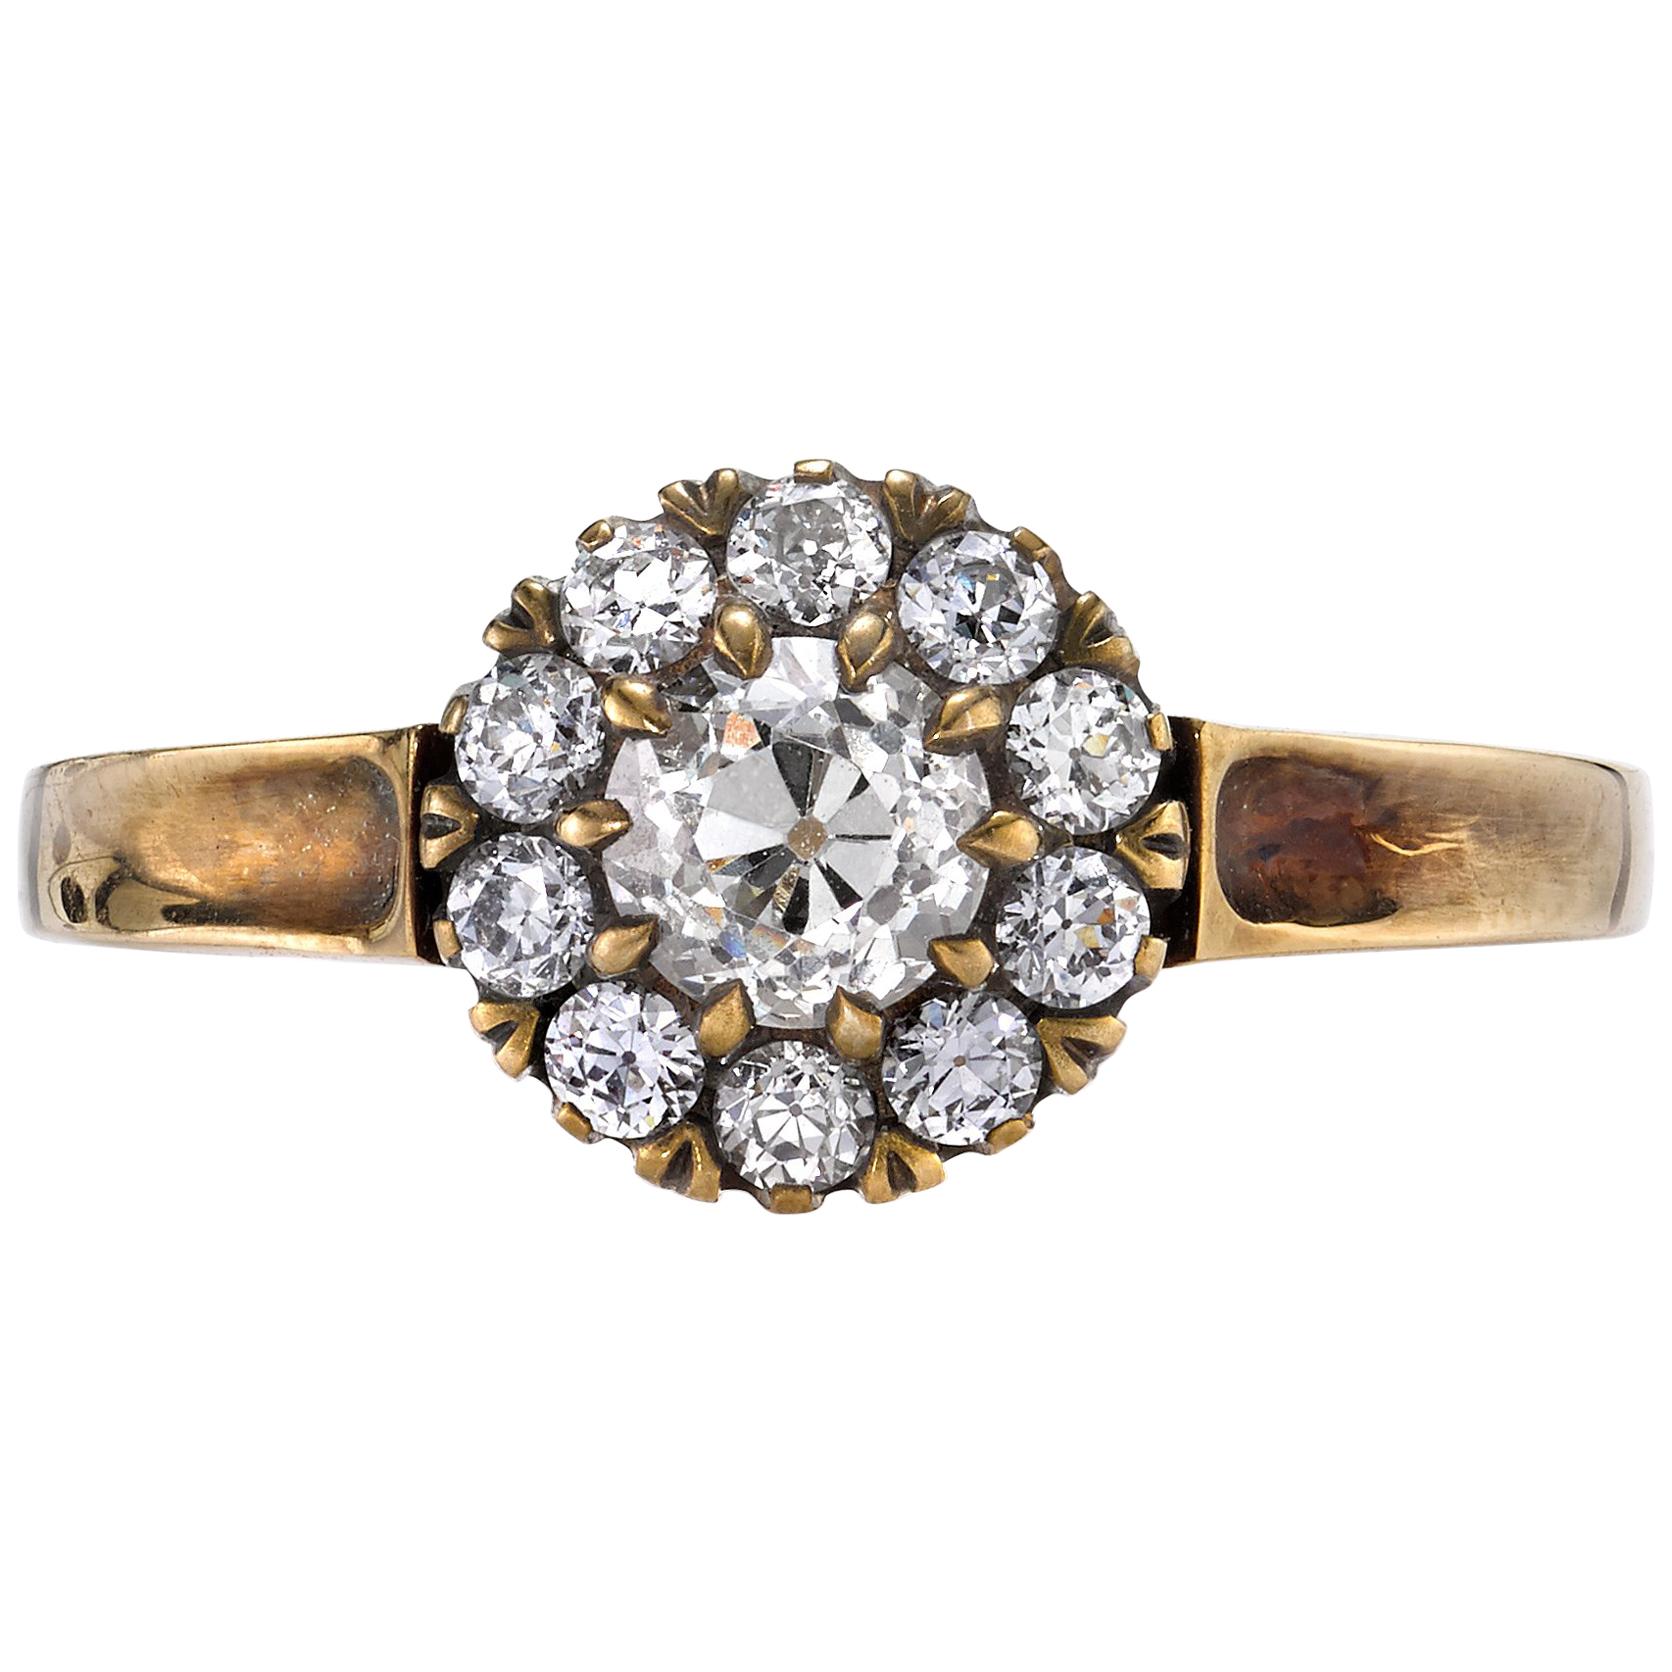 Handcrafted Talia Antique Old Mine Cut Diamond Ring in 18K Gold by Single Stone For Sale